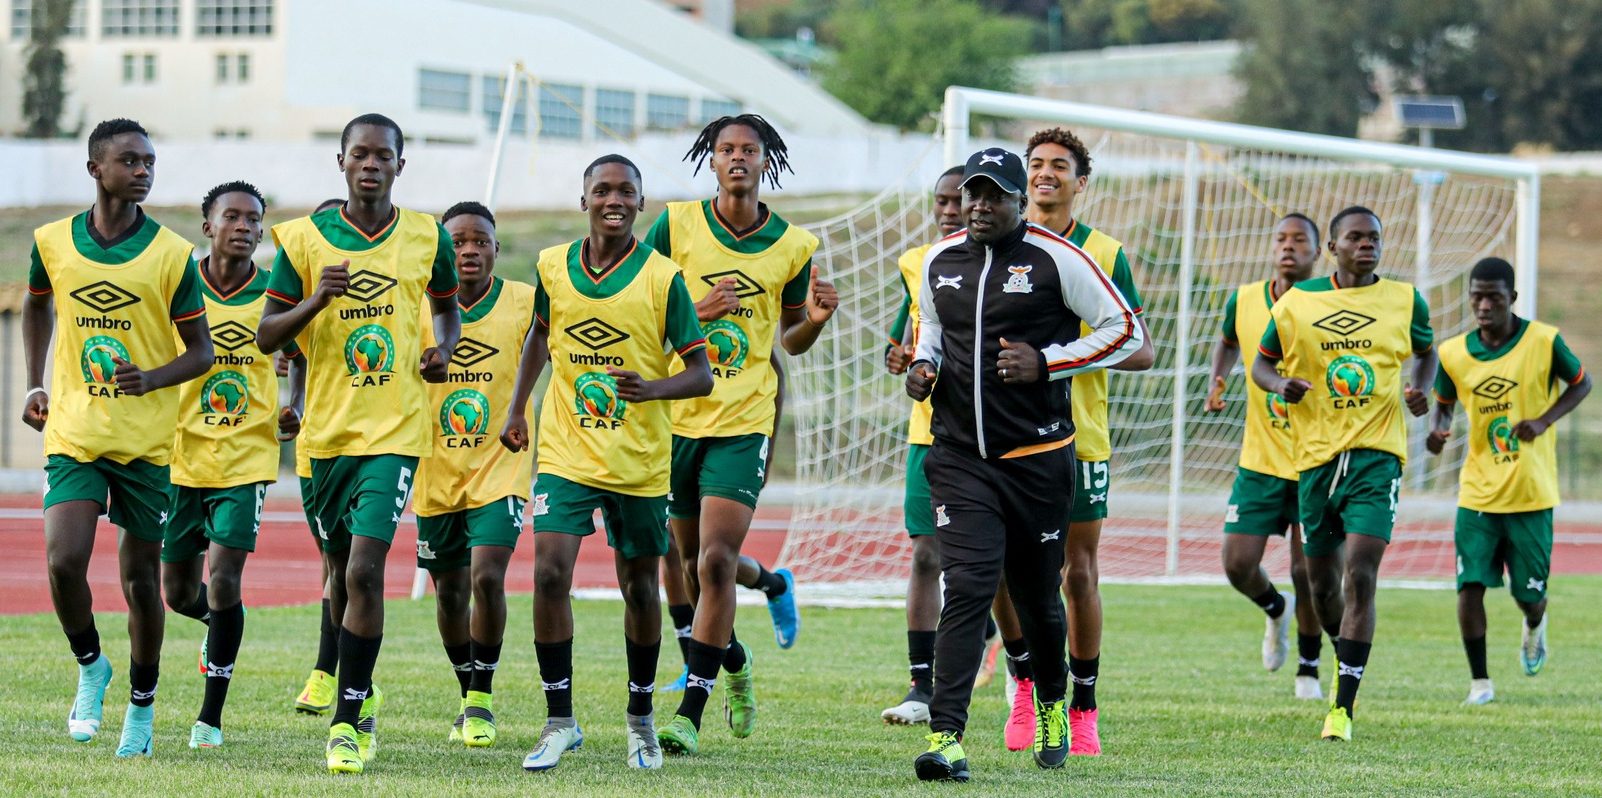 Zambia U17s Gear Up for Thrilling Encounter Against South Africa